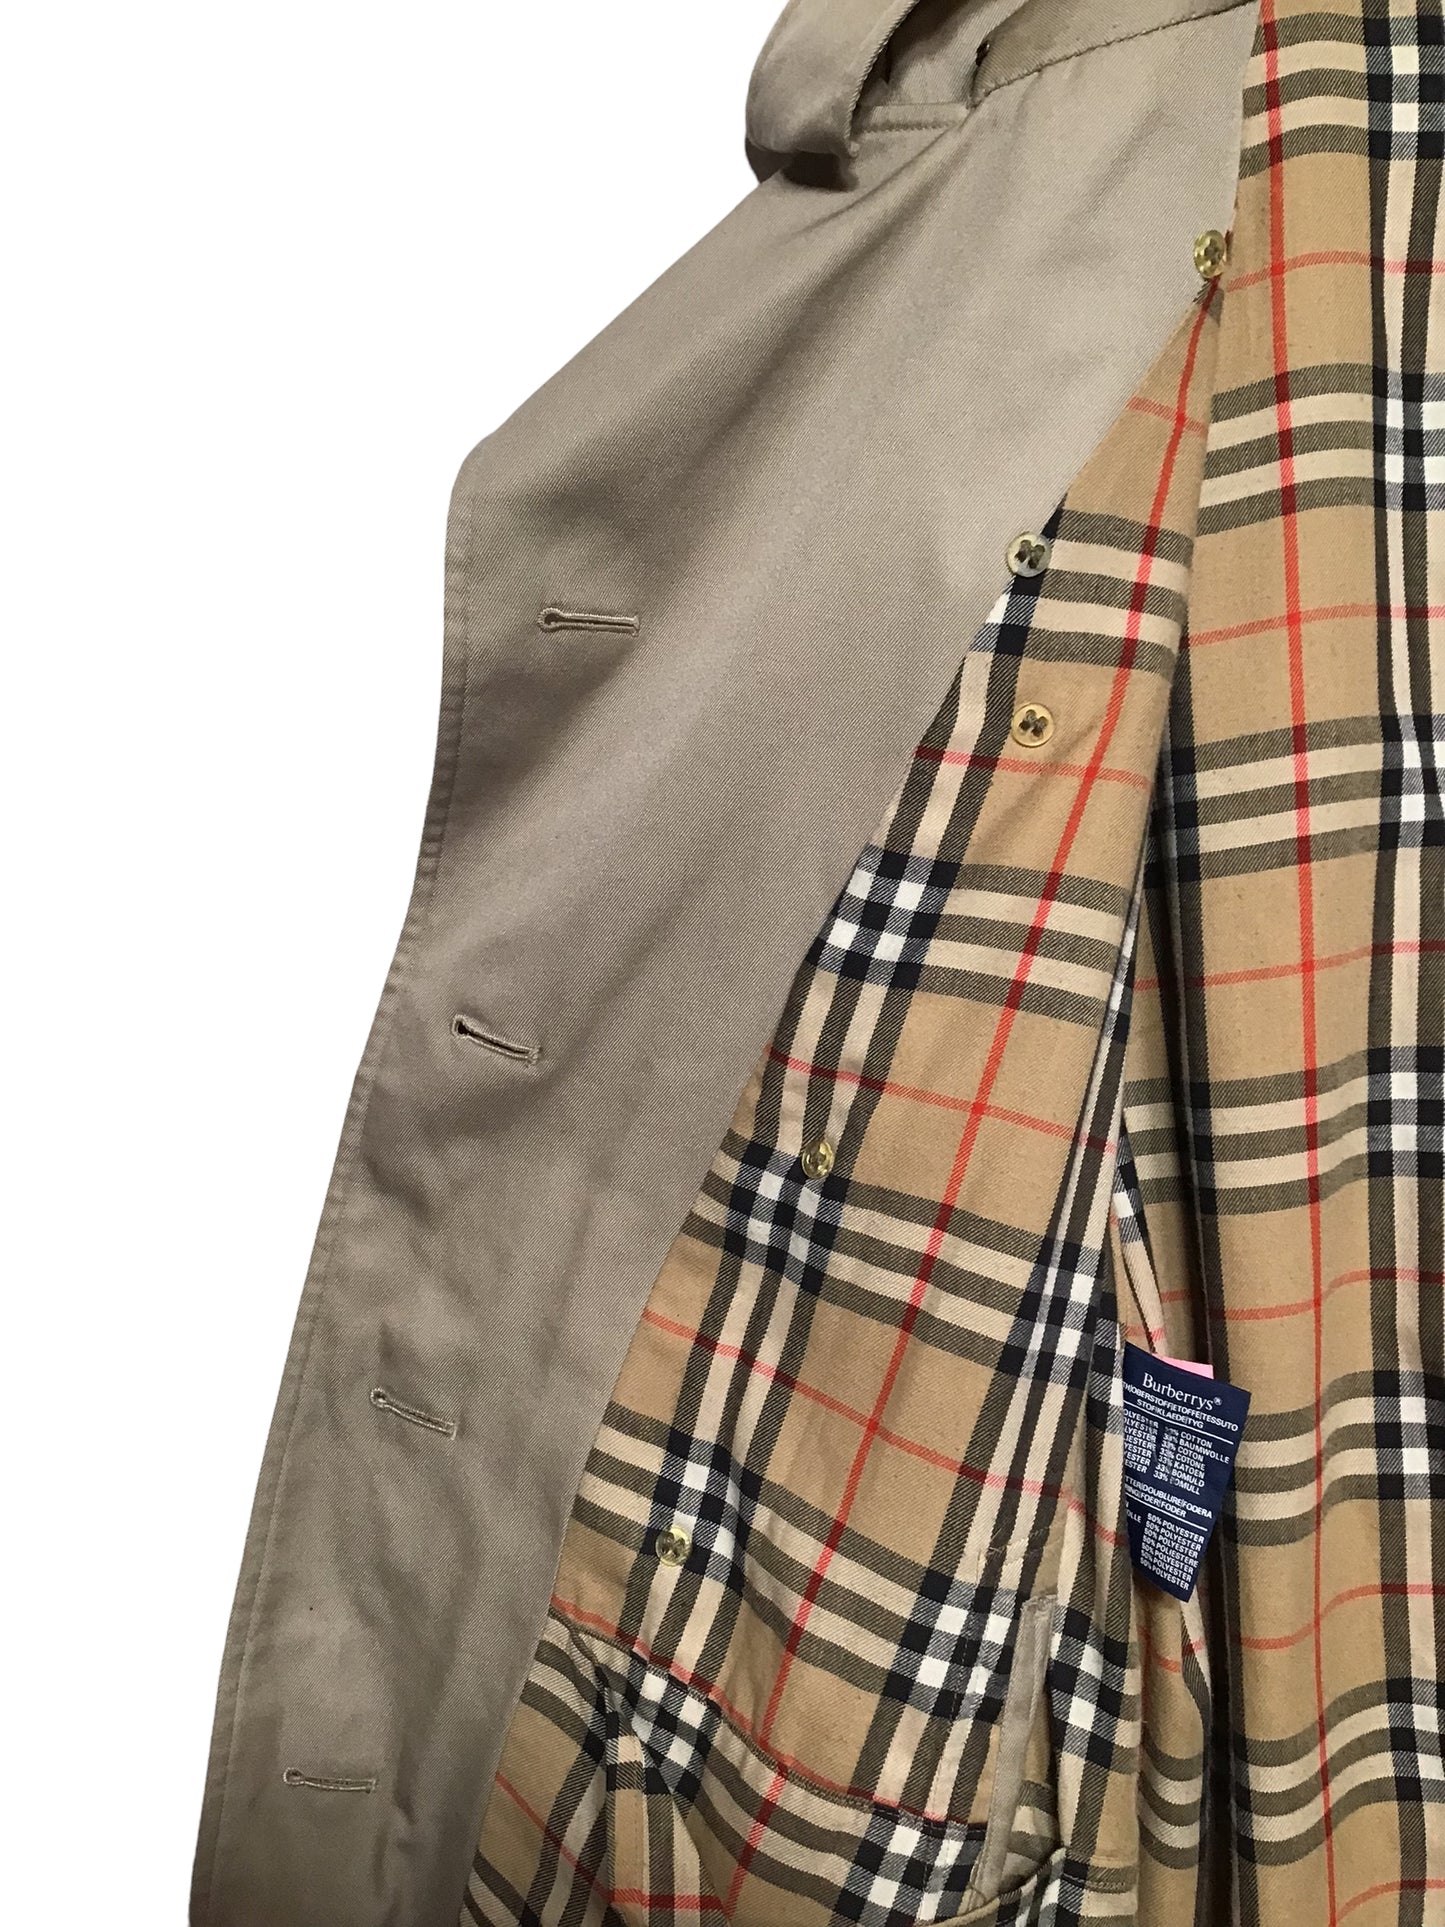 Burberry Trench Coat (Size XL)